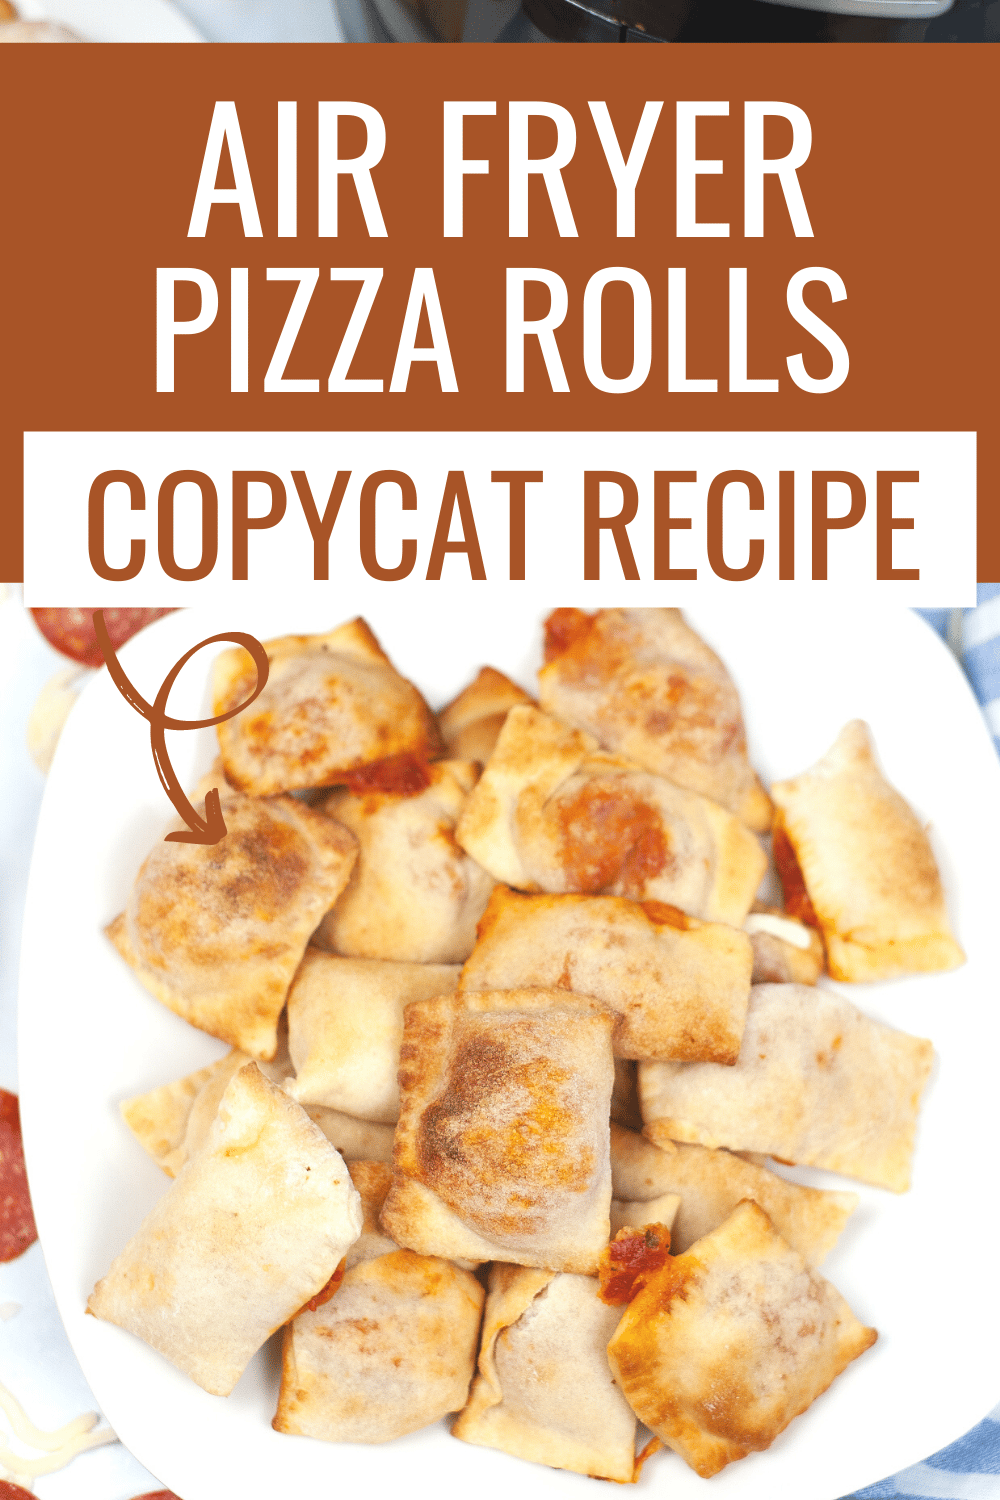 Air fryer pizza rolls are an easy and delicious way to enjoy pizza! These little bites are perfect for a party or as a quick and easy dinner. #airfryerpizzarolls #airfryer #pizzarolls #pizza via @wondermomwannab